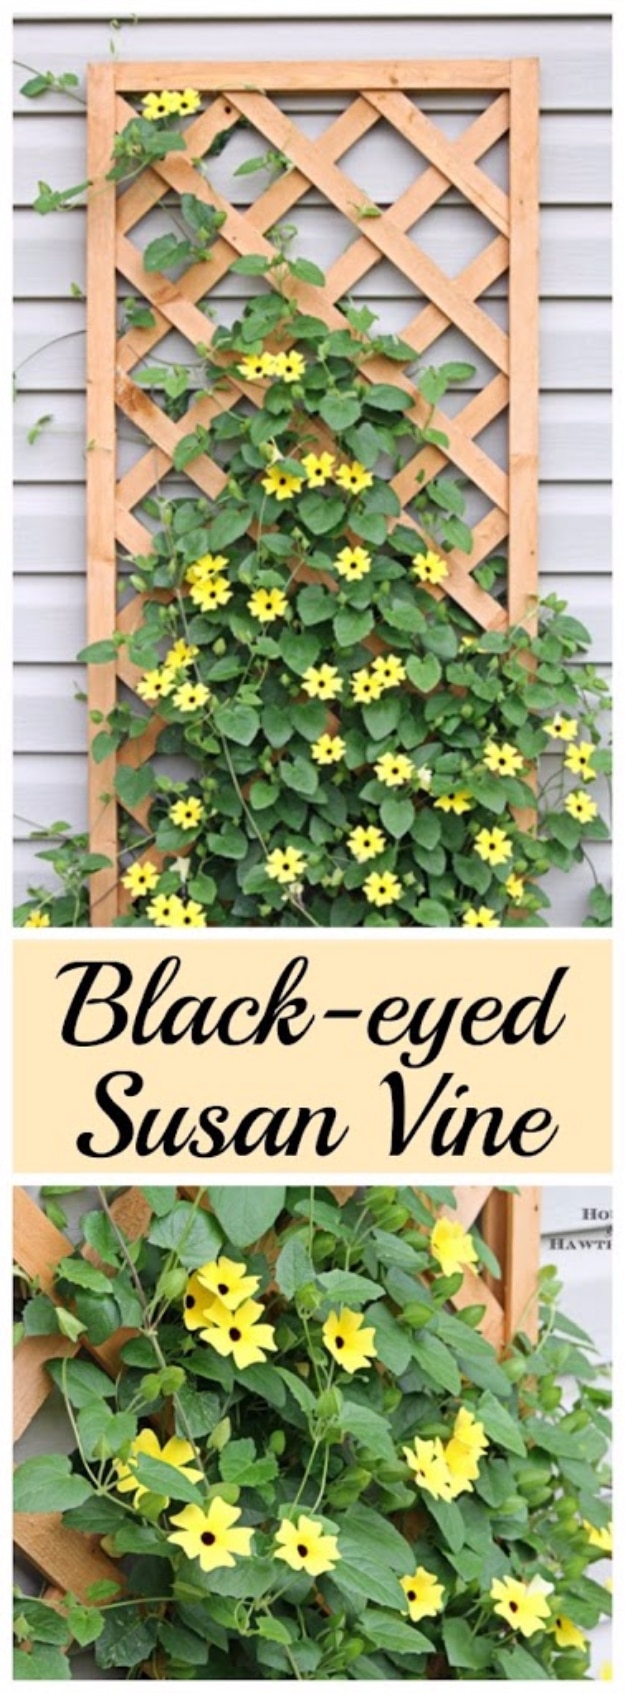 Creative Ways to Increase Curb Appeal on A Budget - Back Eyed Susan Vines - Cheap and Easy Ideas for Upgrading Your Front Porch, Landscaping, Driveways, Garage Doors, Brick and Home Exteriors. Add Window Boxes, House Numbers, Mailboxes and Yard Makeovers http://diyjoy.com/diy-curb-appeal-ideas